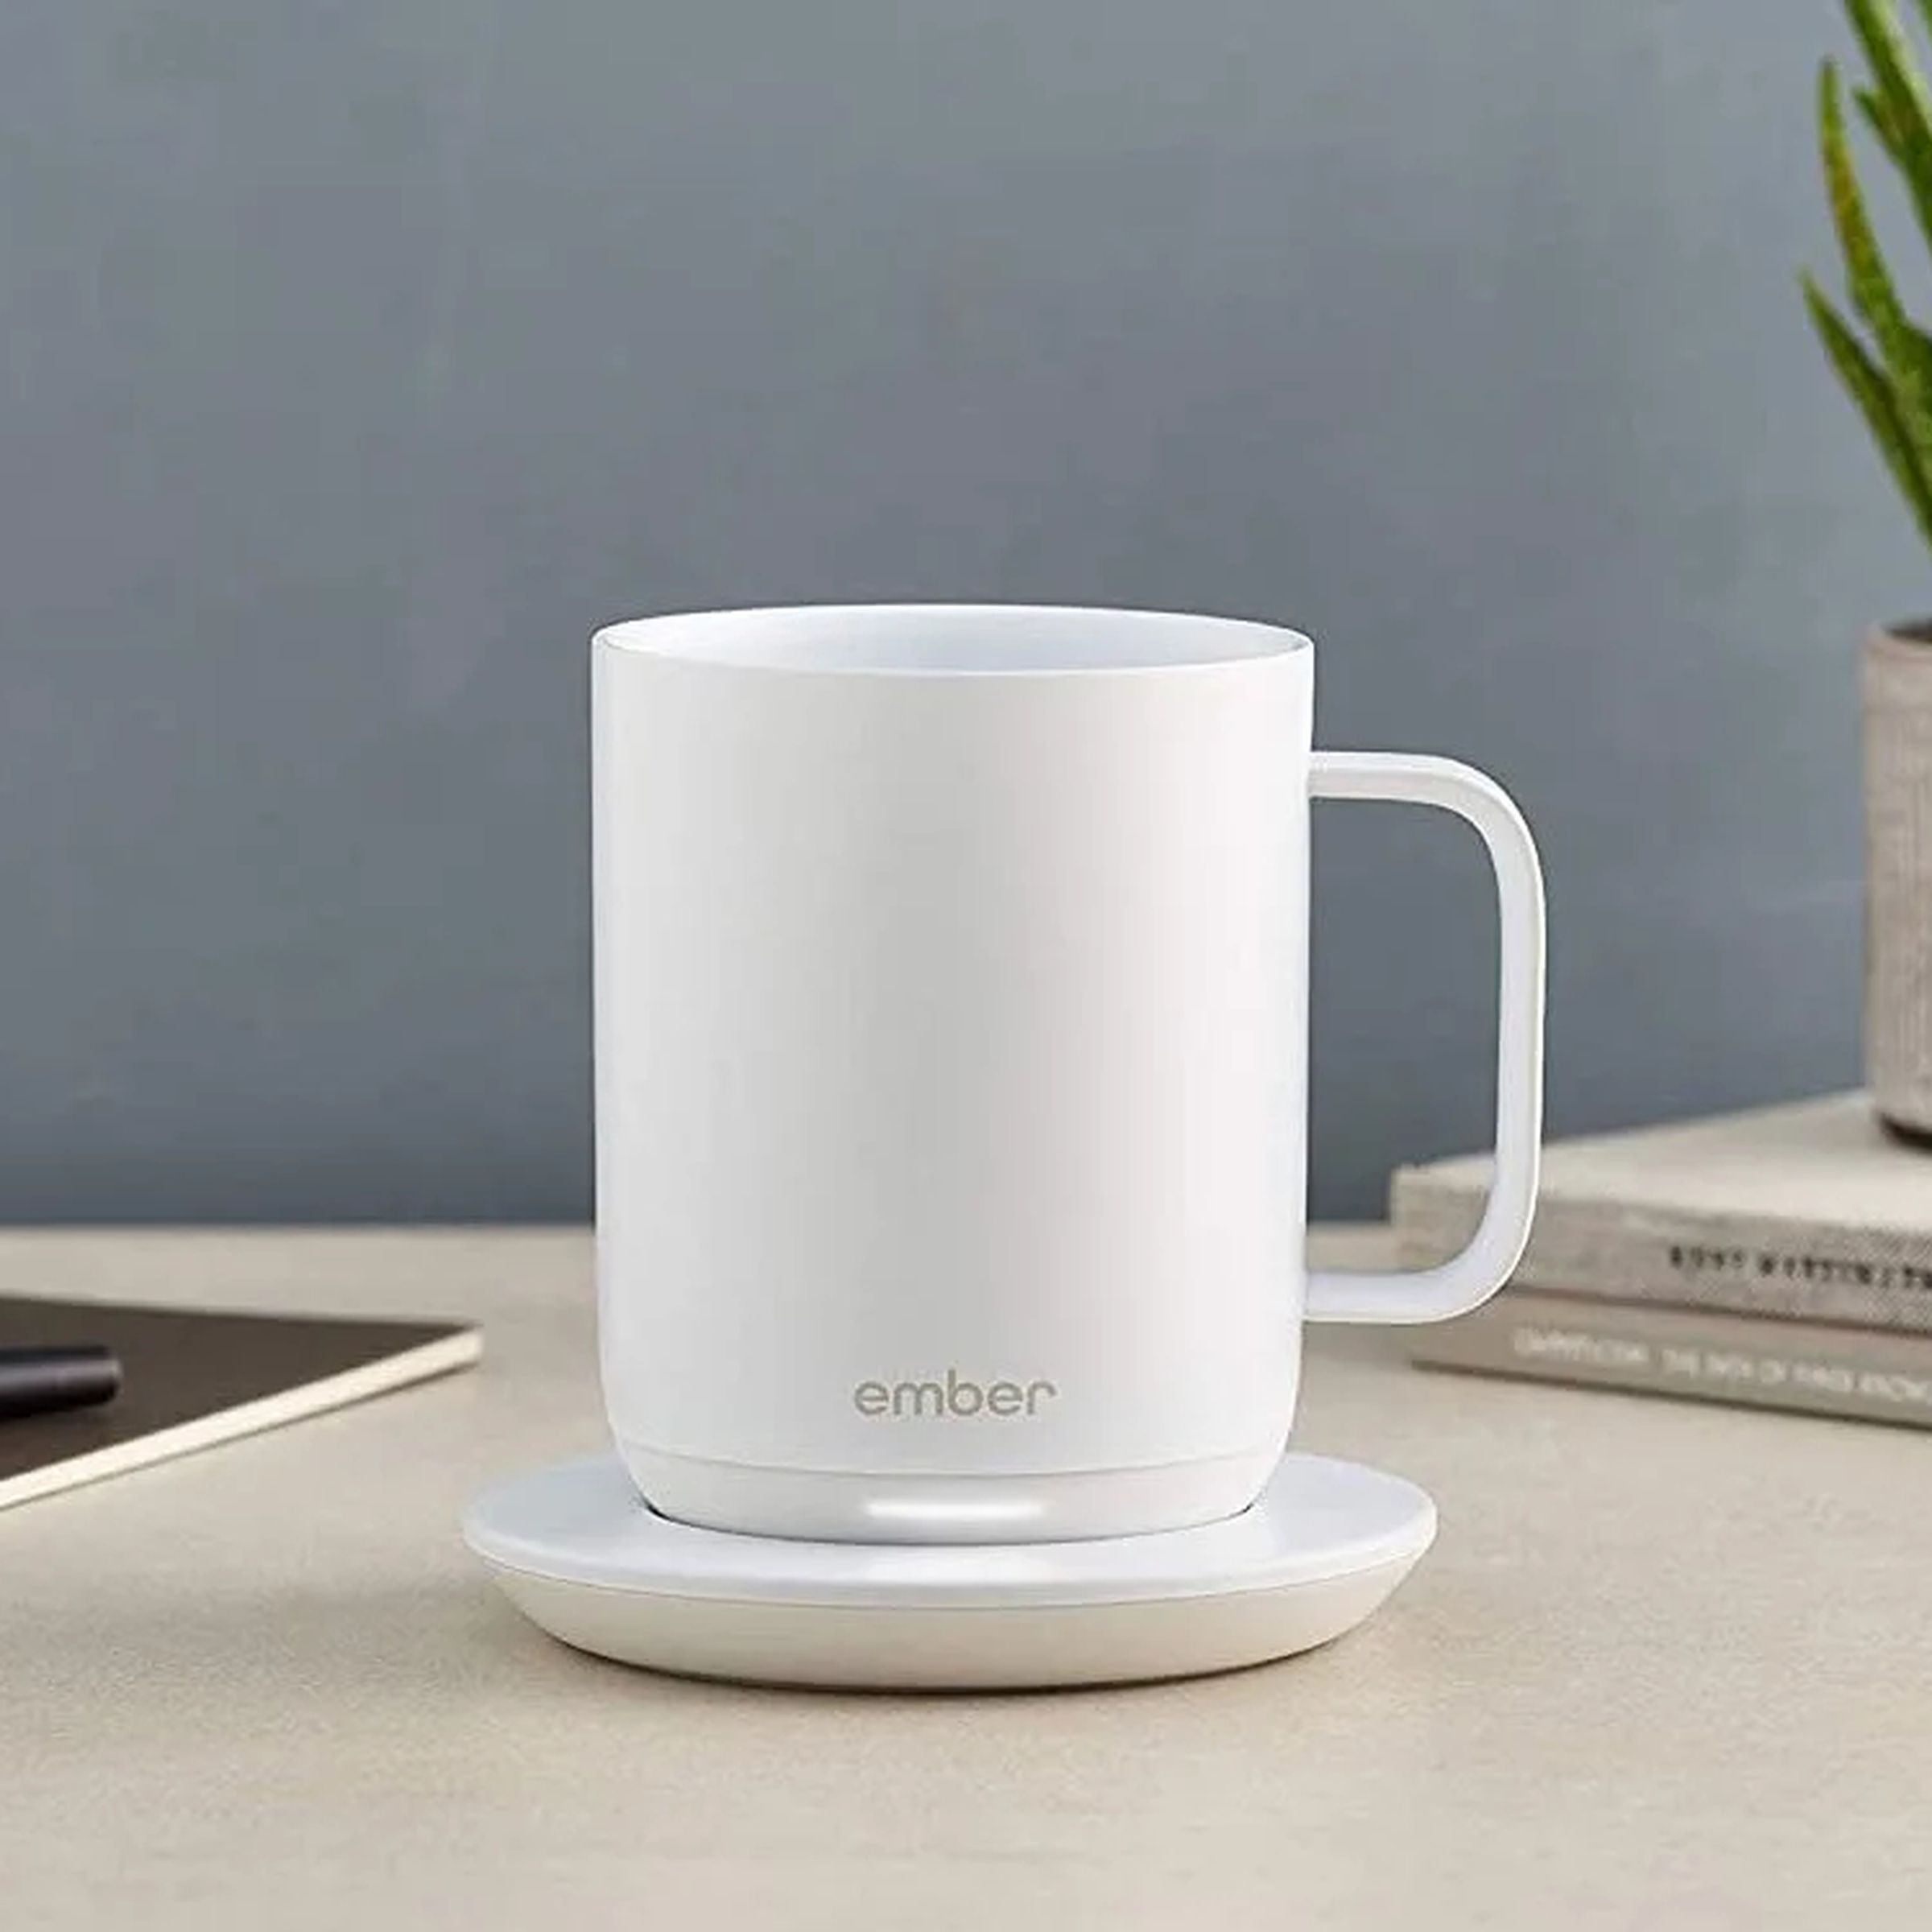 Ember’s 14-ounce mug is on sale on Amazon for $119.95, about 20 percent of the list price.